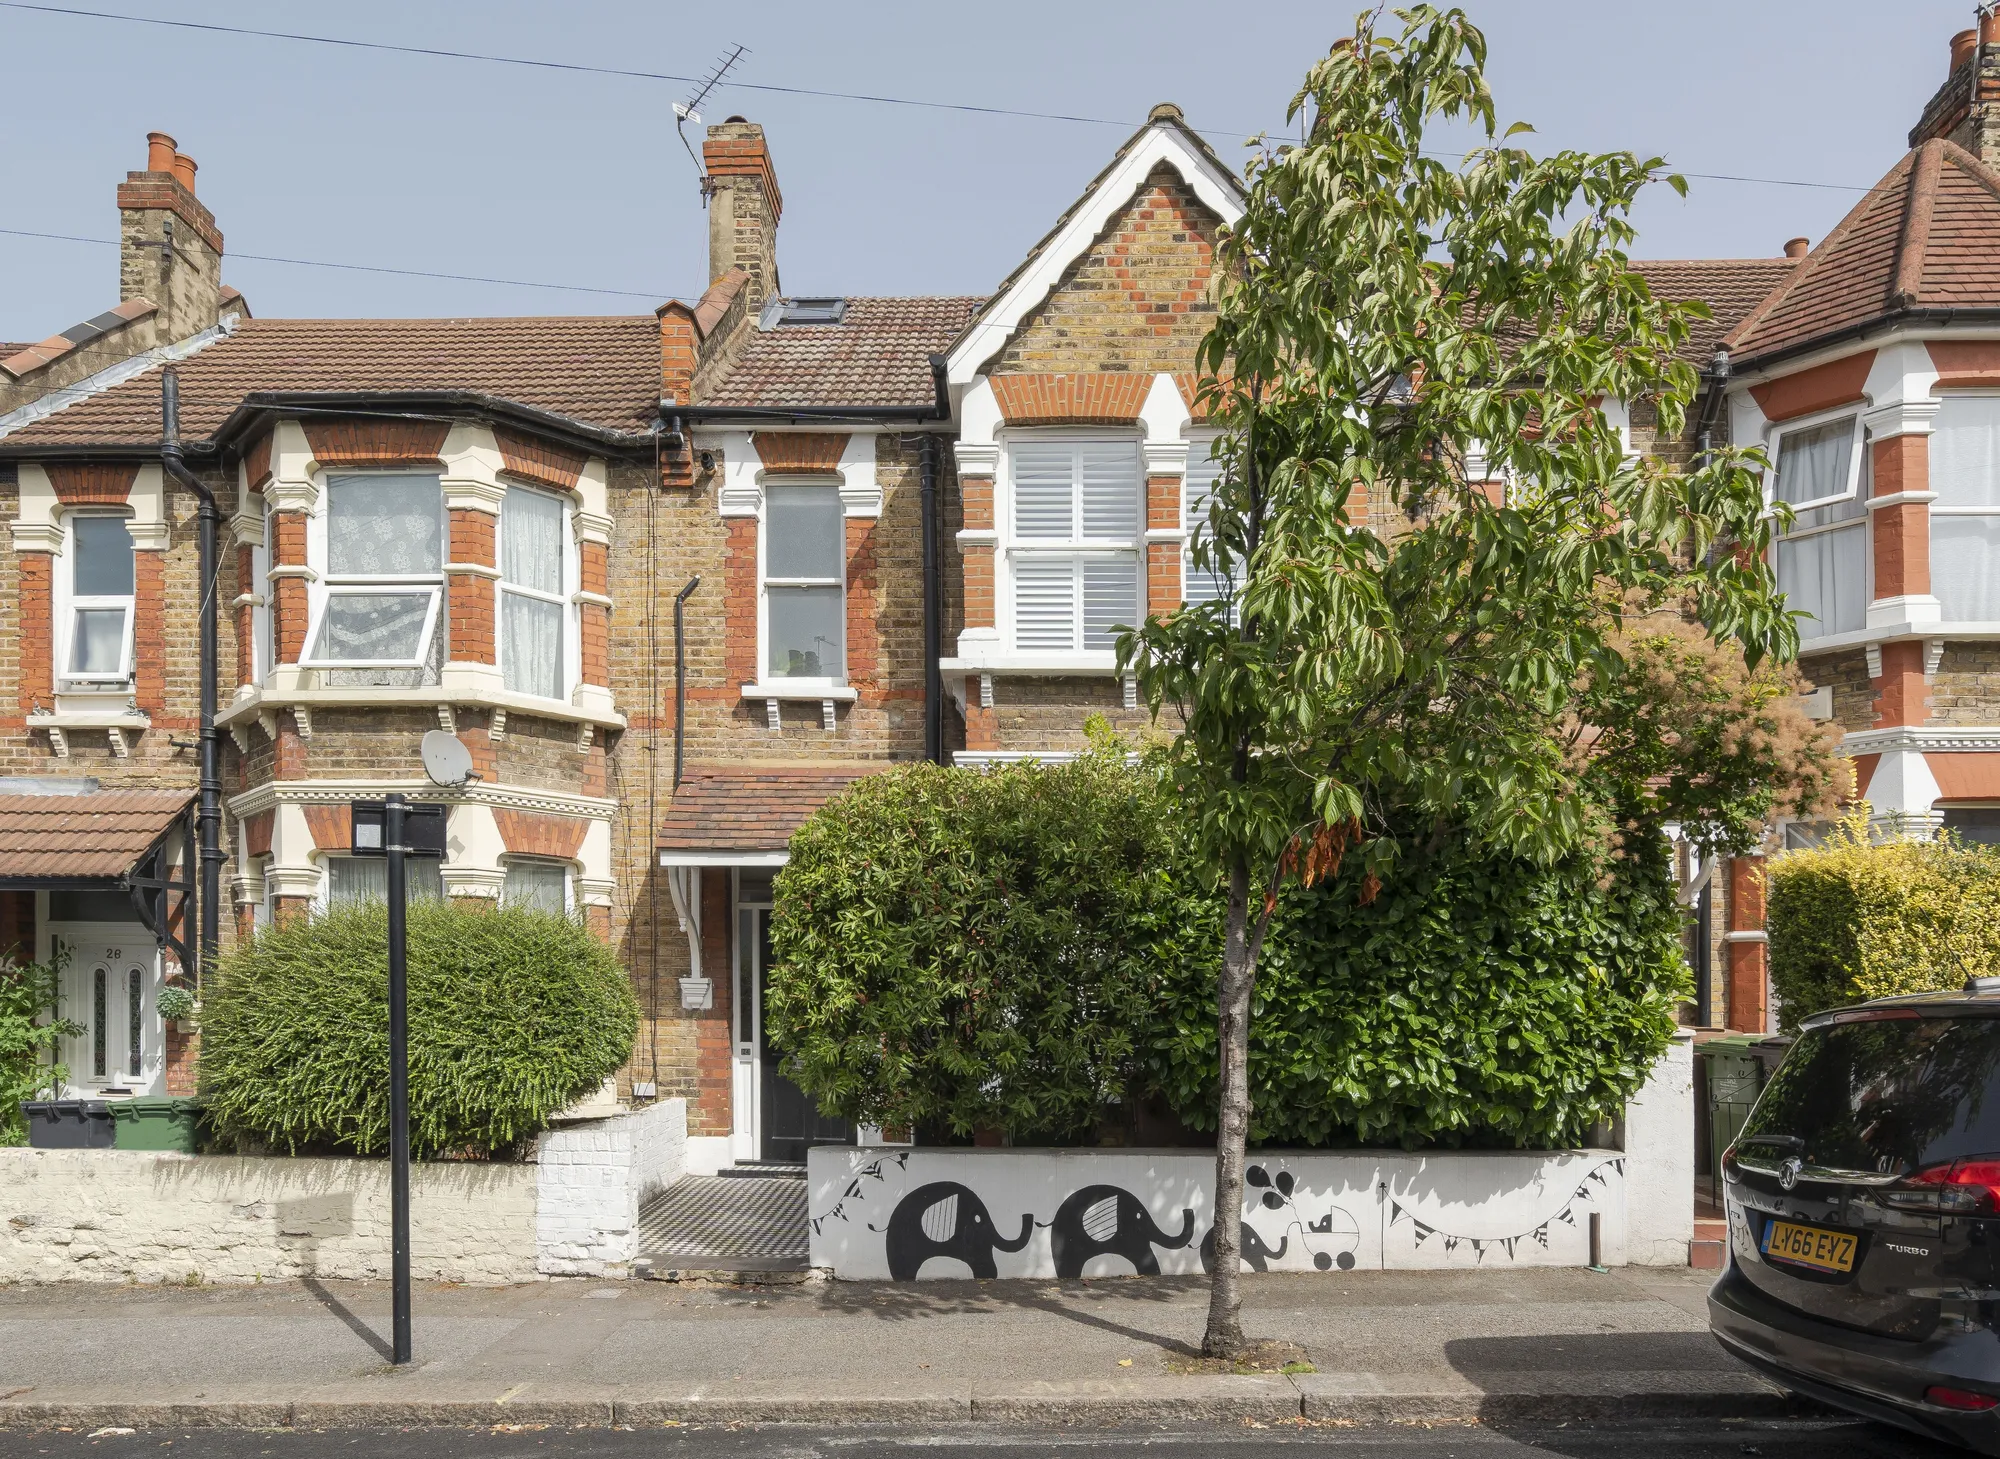 4 bed mid-terraced house for sale in Scarborough Road, Leytonstone - Property Image 1